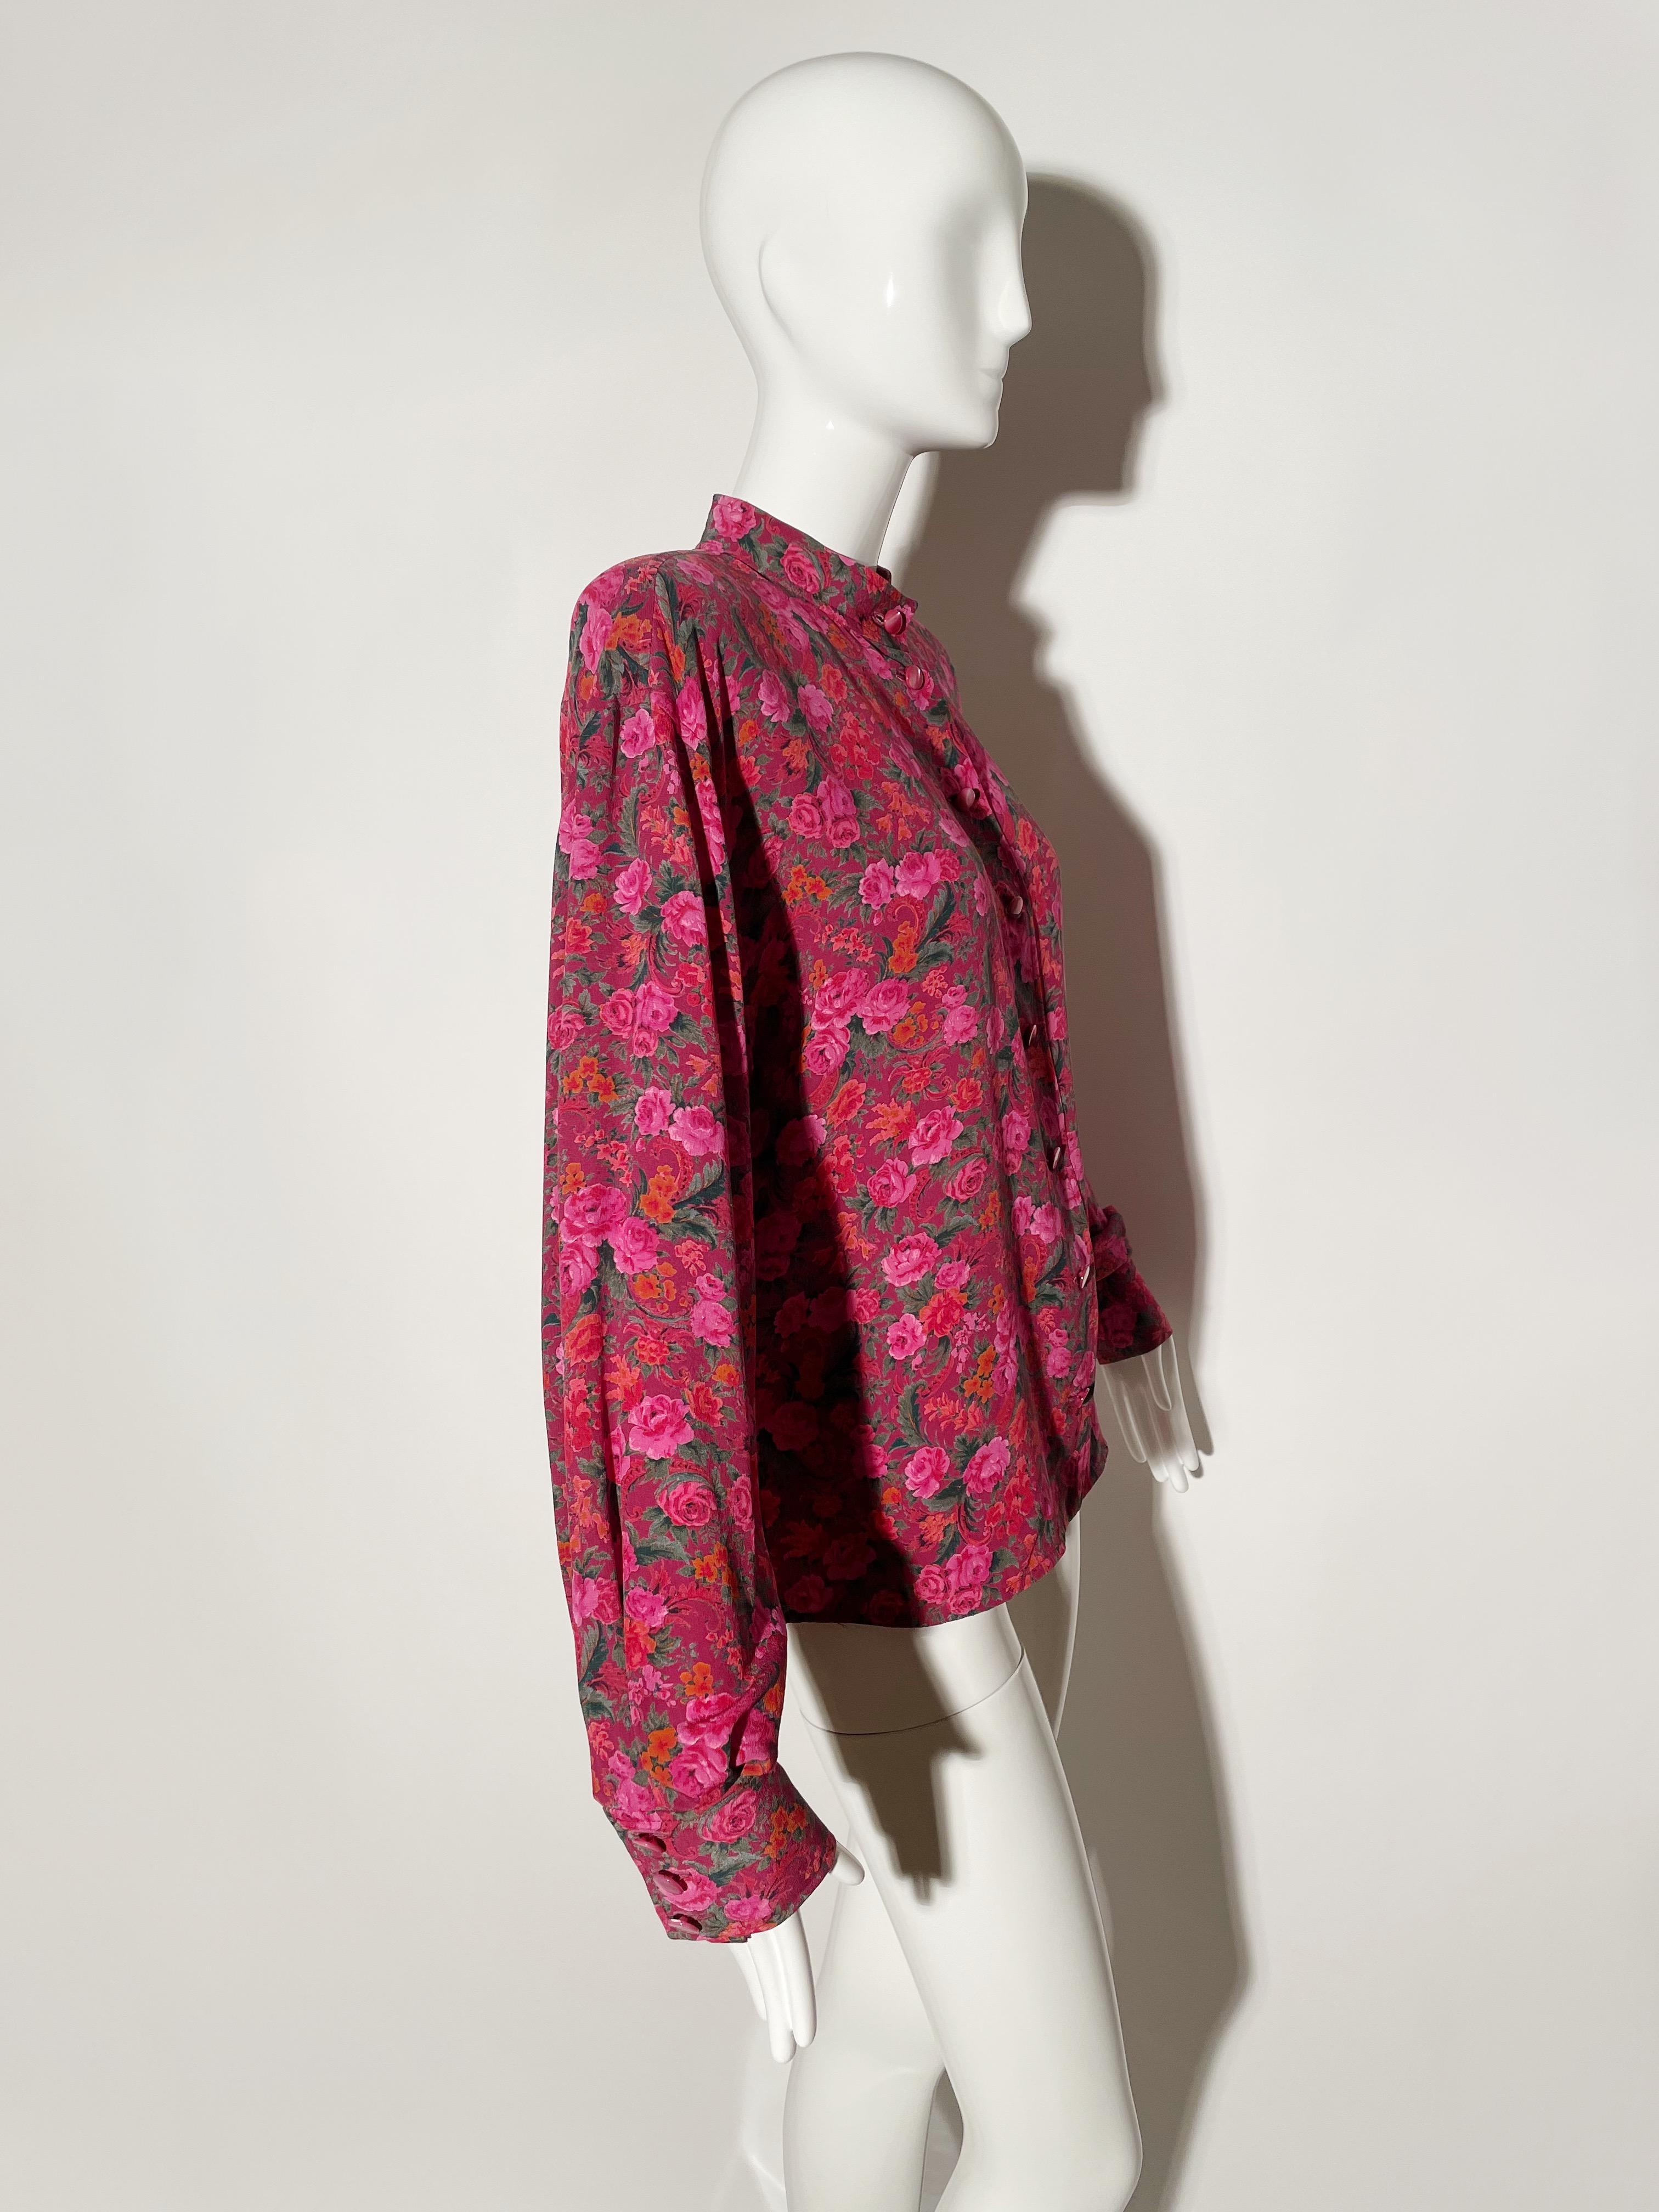 Emanuel Ungaro Pink Floral Blouse  In Excellent Condition For Sale In Waterford, MI